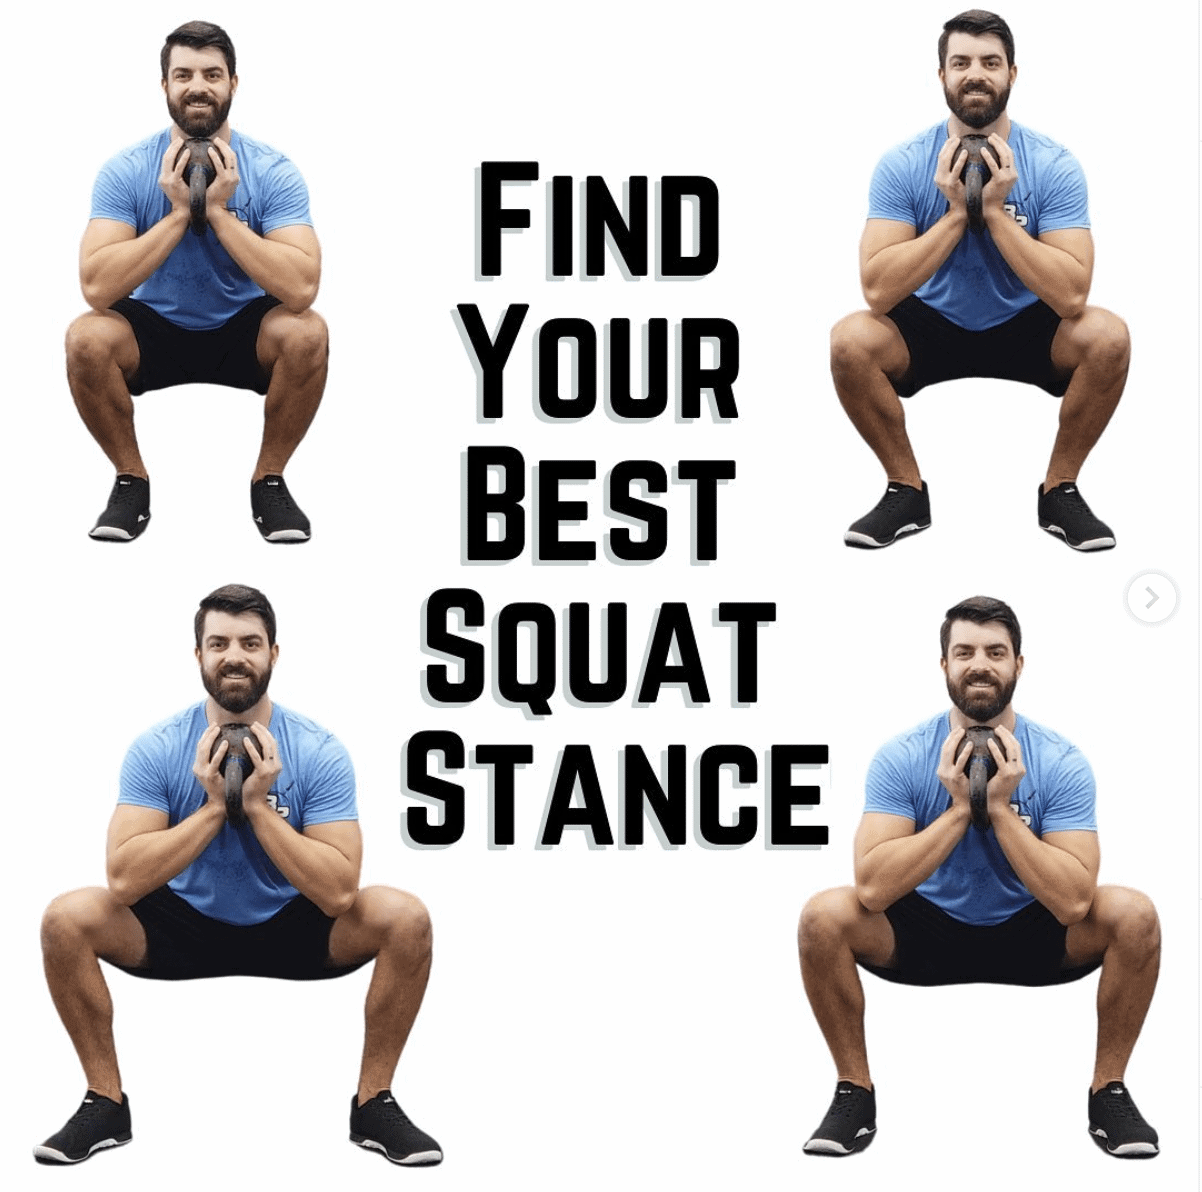 Squat stance toe out